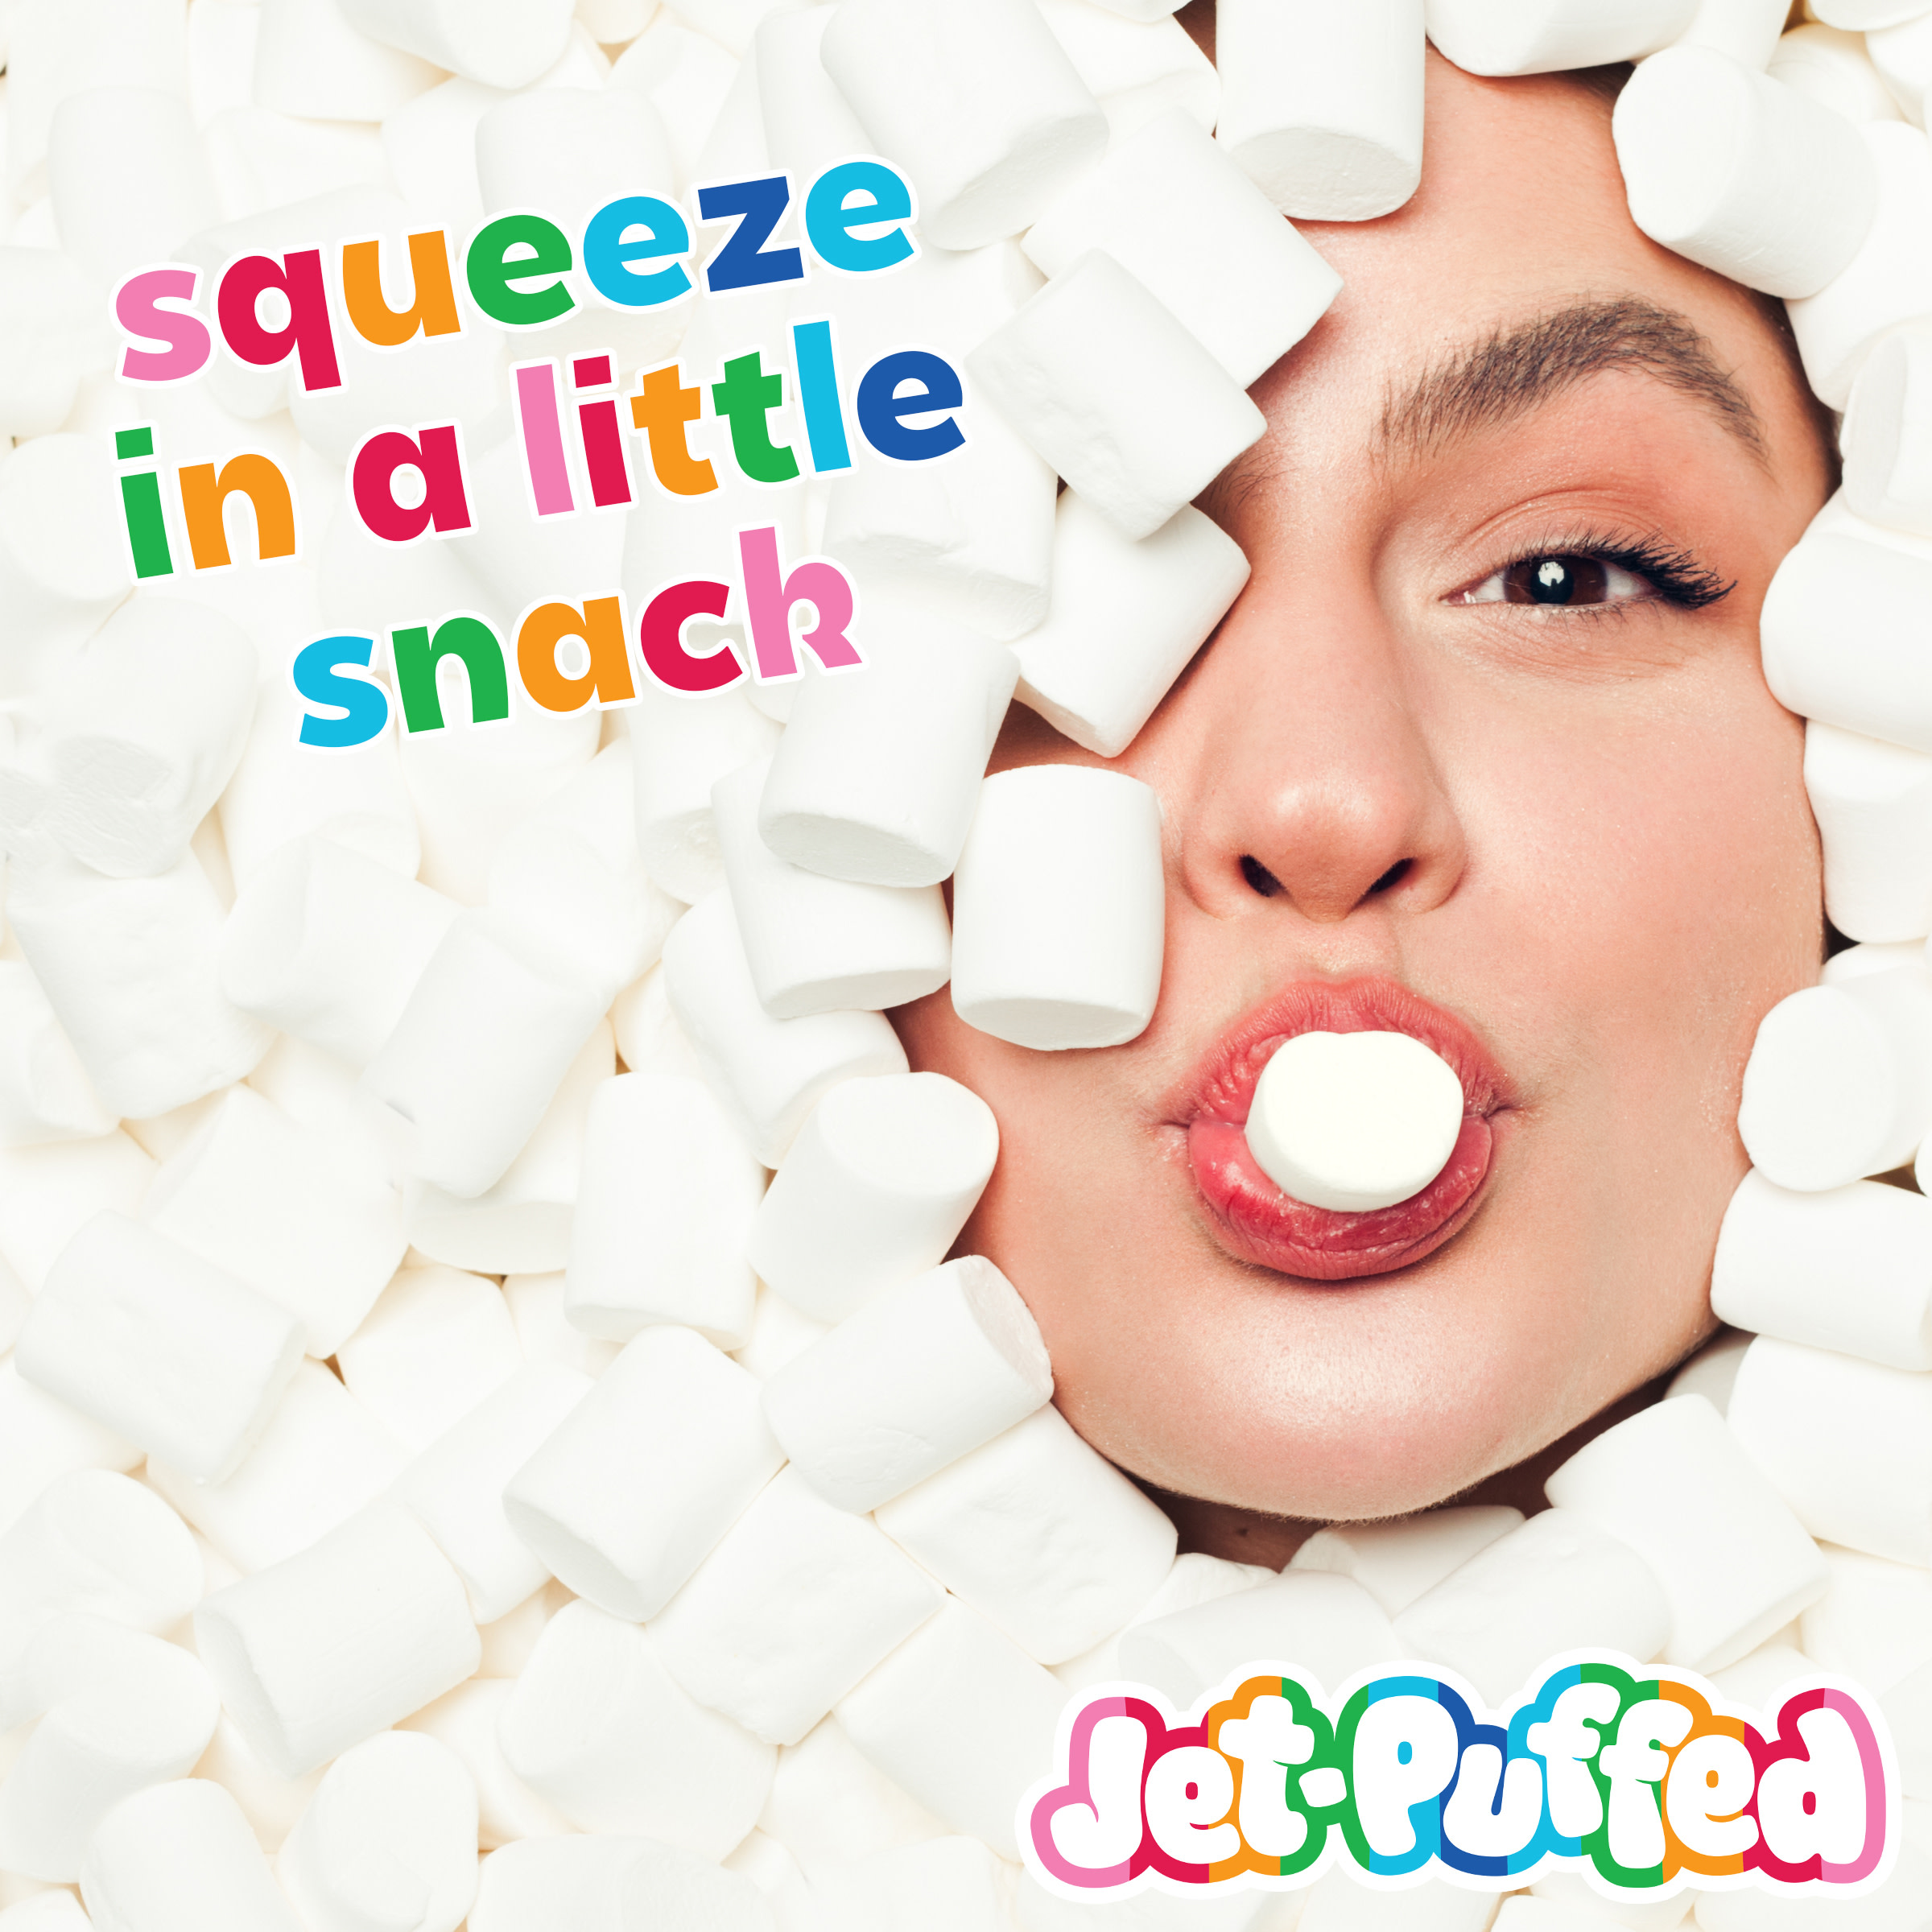 Jet-Puffed Stackers Marshmallows, 8 oz. Bag - image 7 of 16